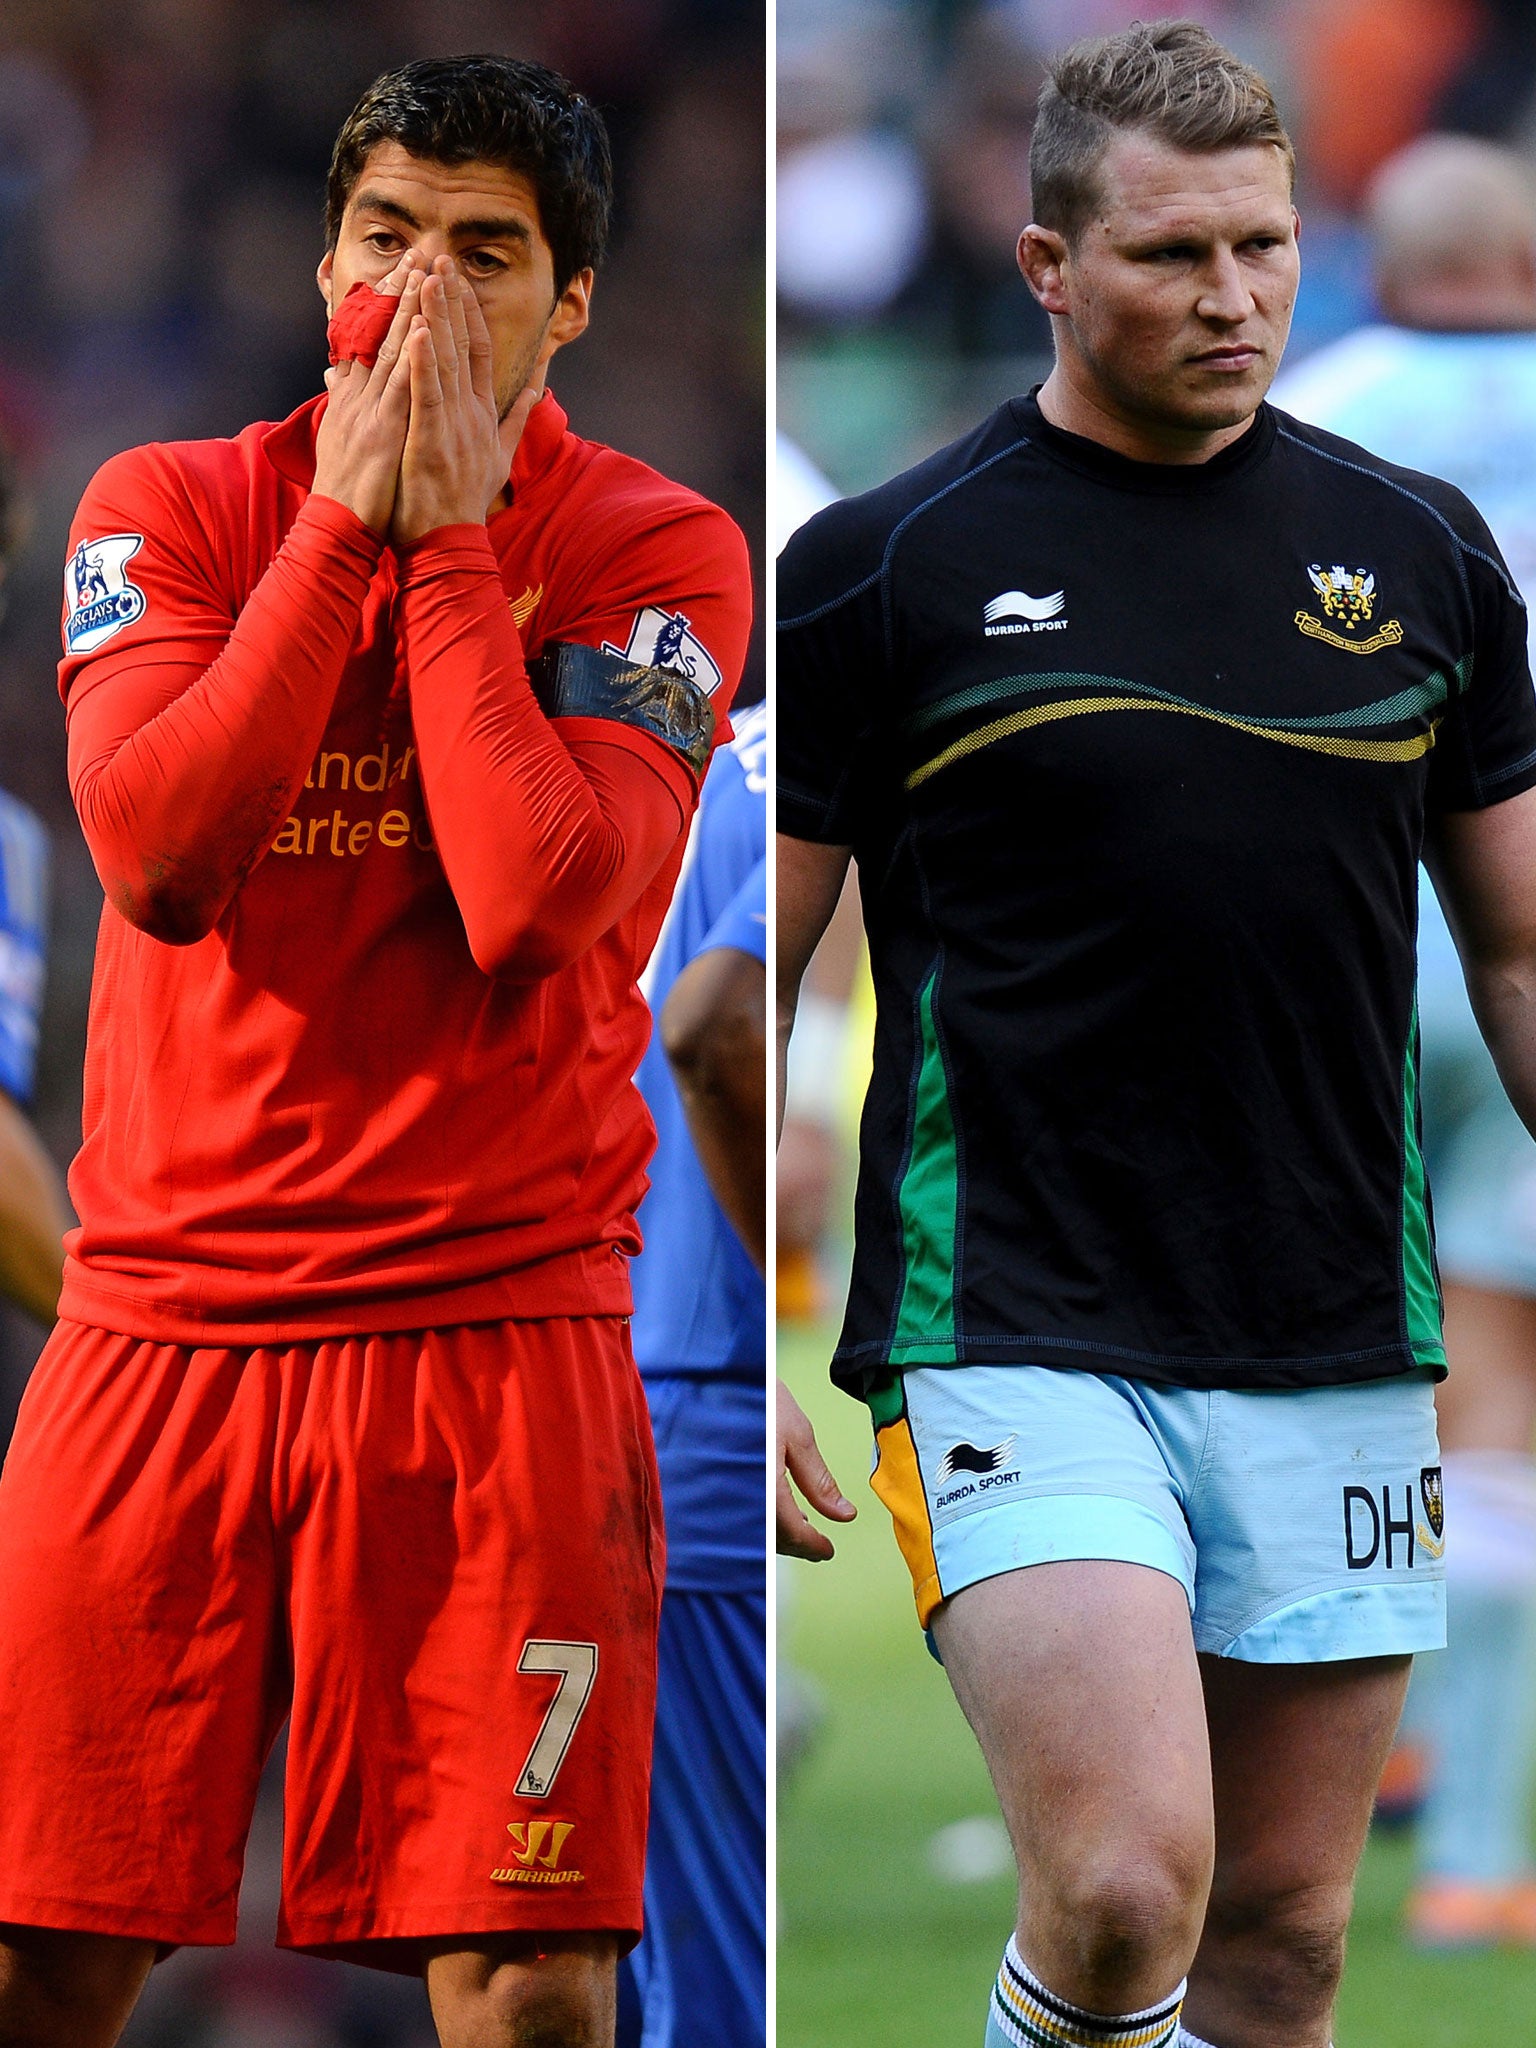 Luis Suarez, left, and Dylan Hartley, right, have both fallen foul of authority